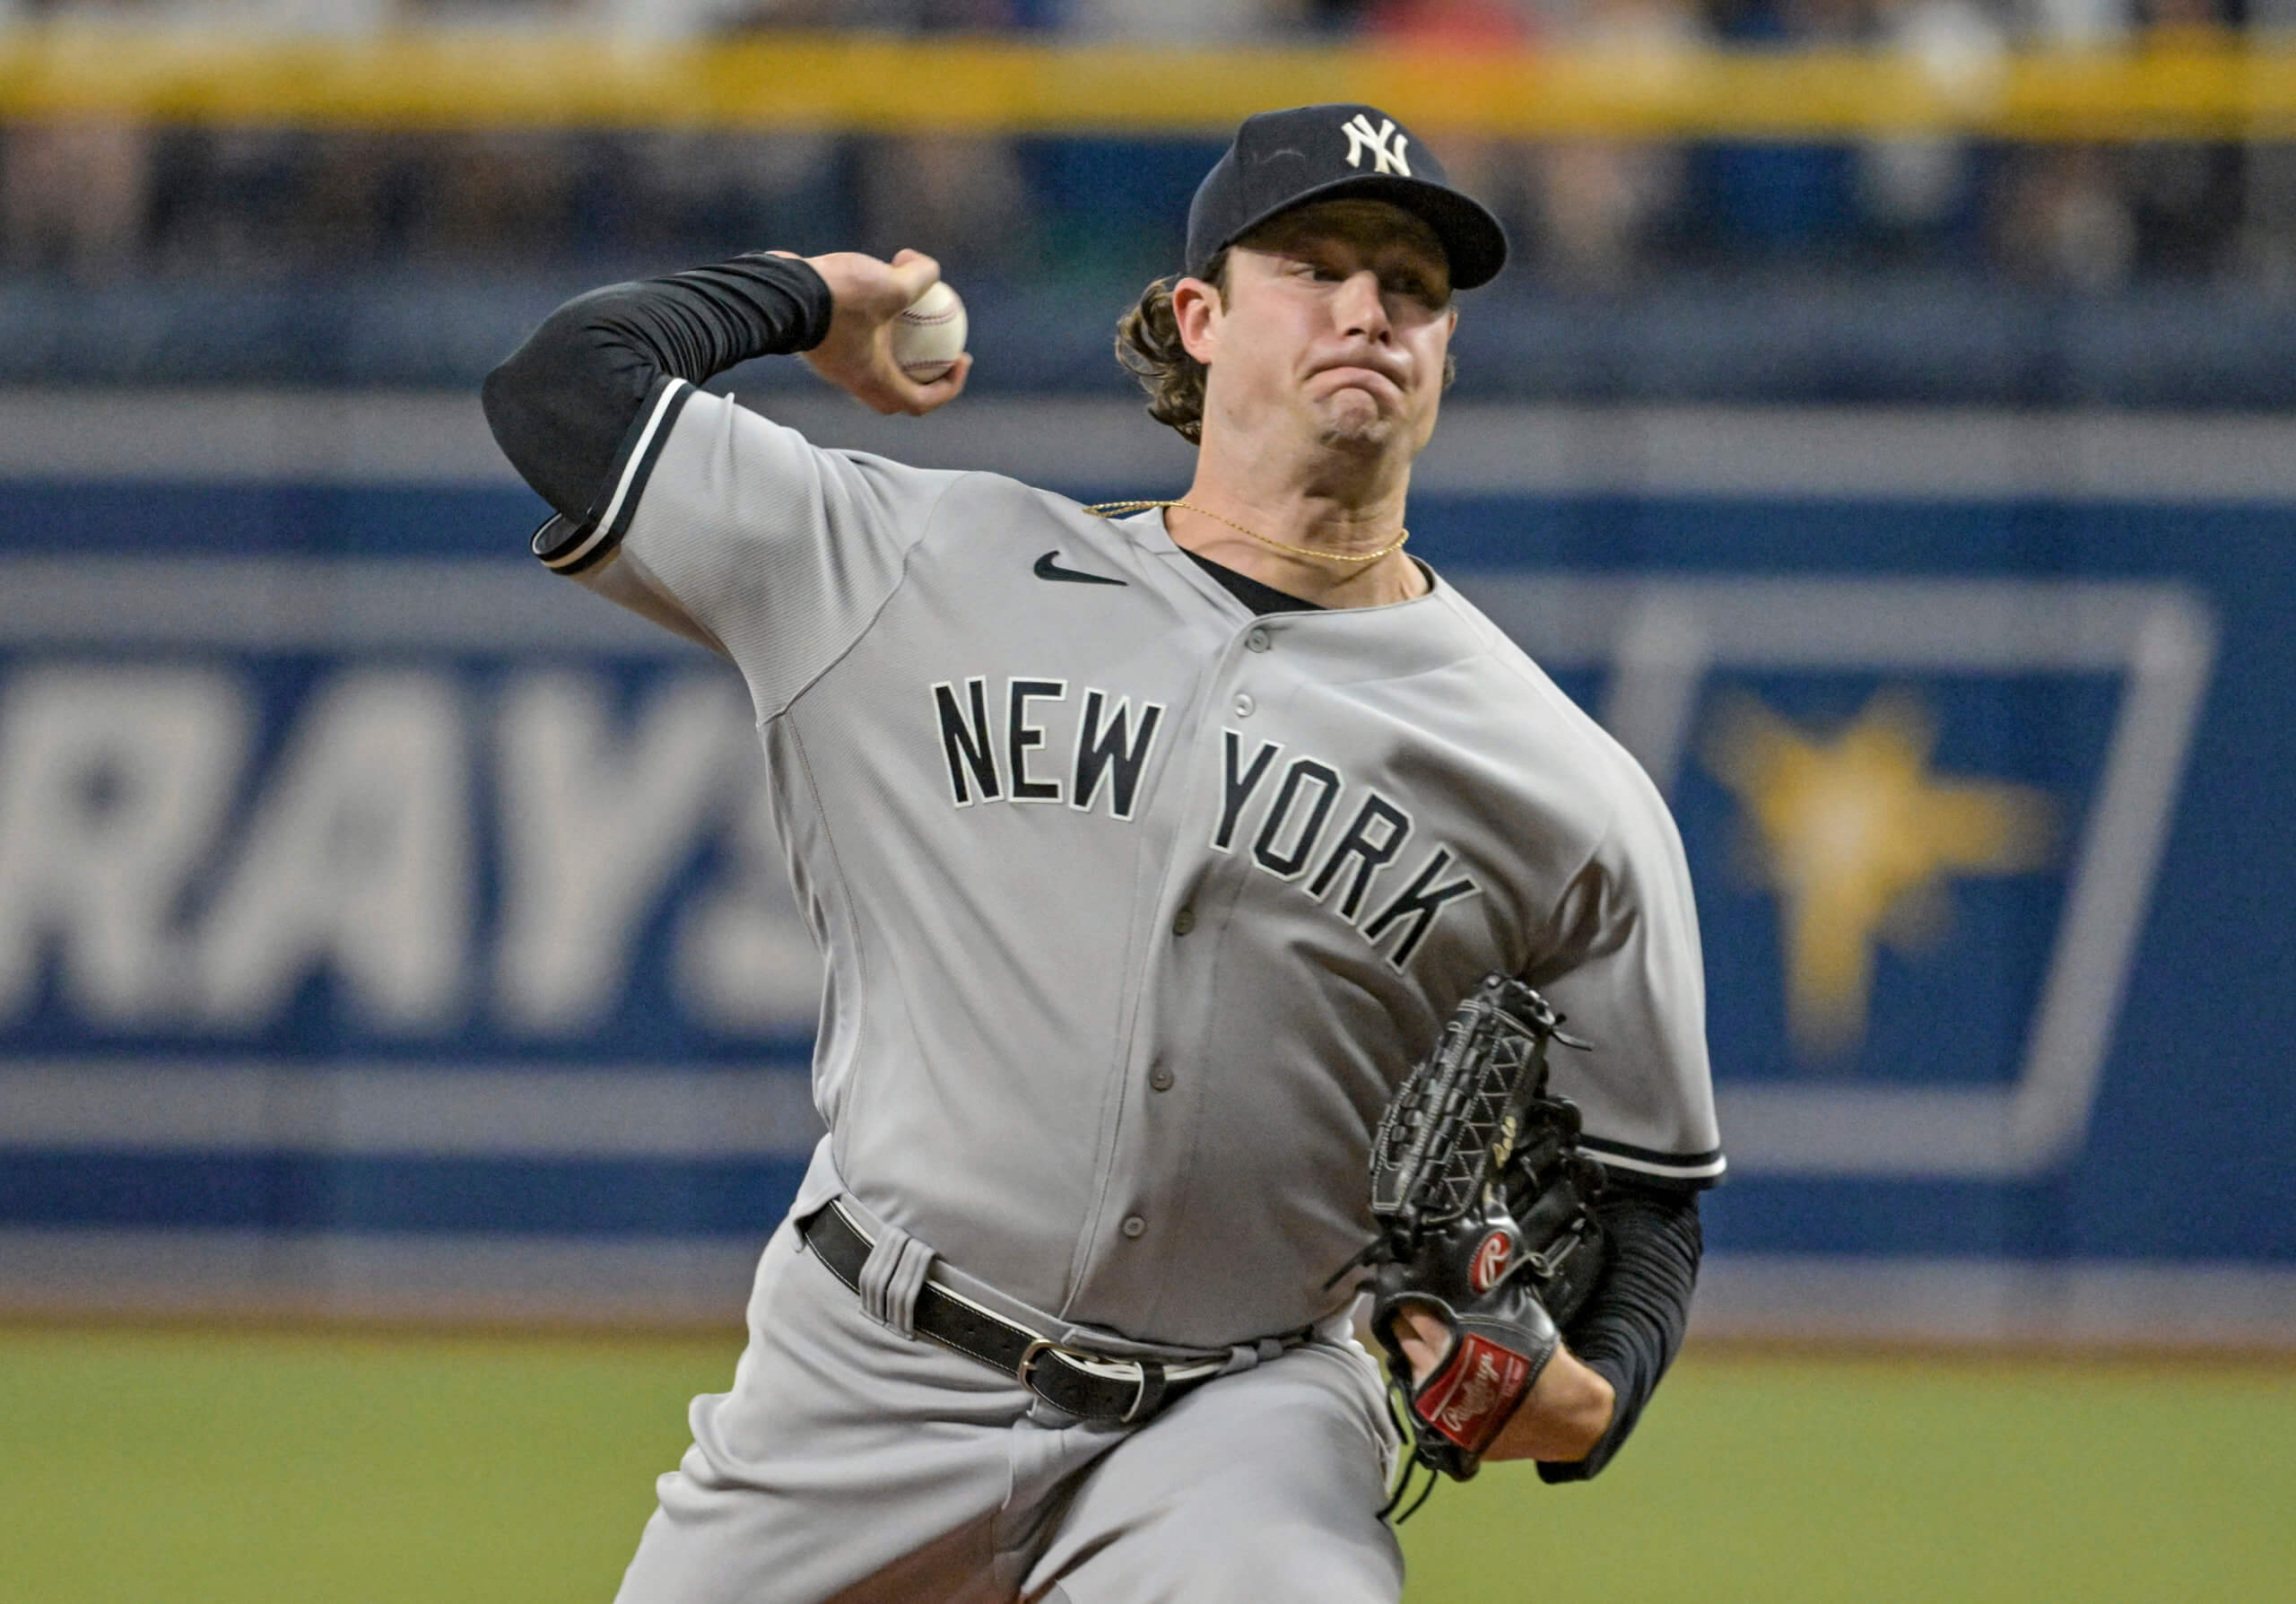 mlb teams without jersey names Gerrit Cole's windup assisted his big  14-strikeout start for Yankees